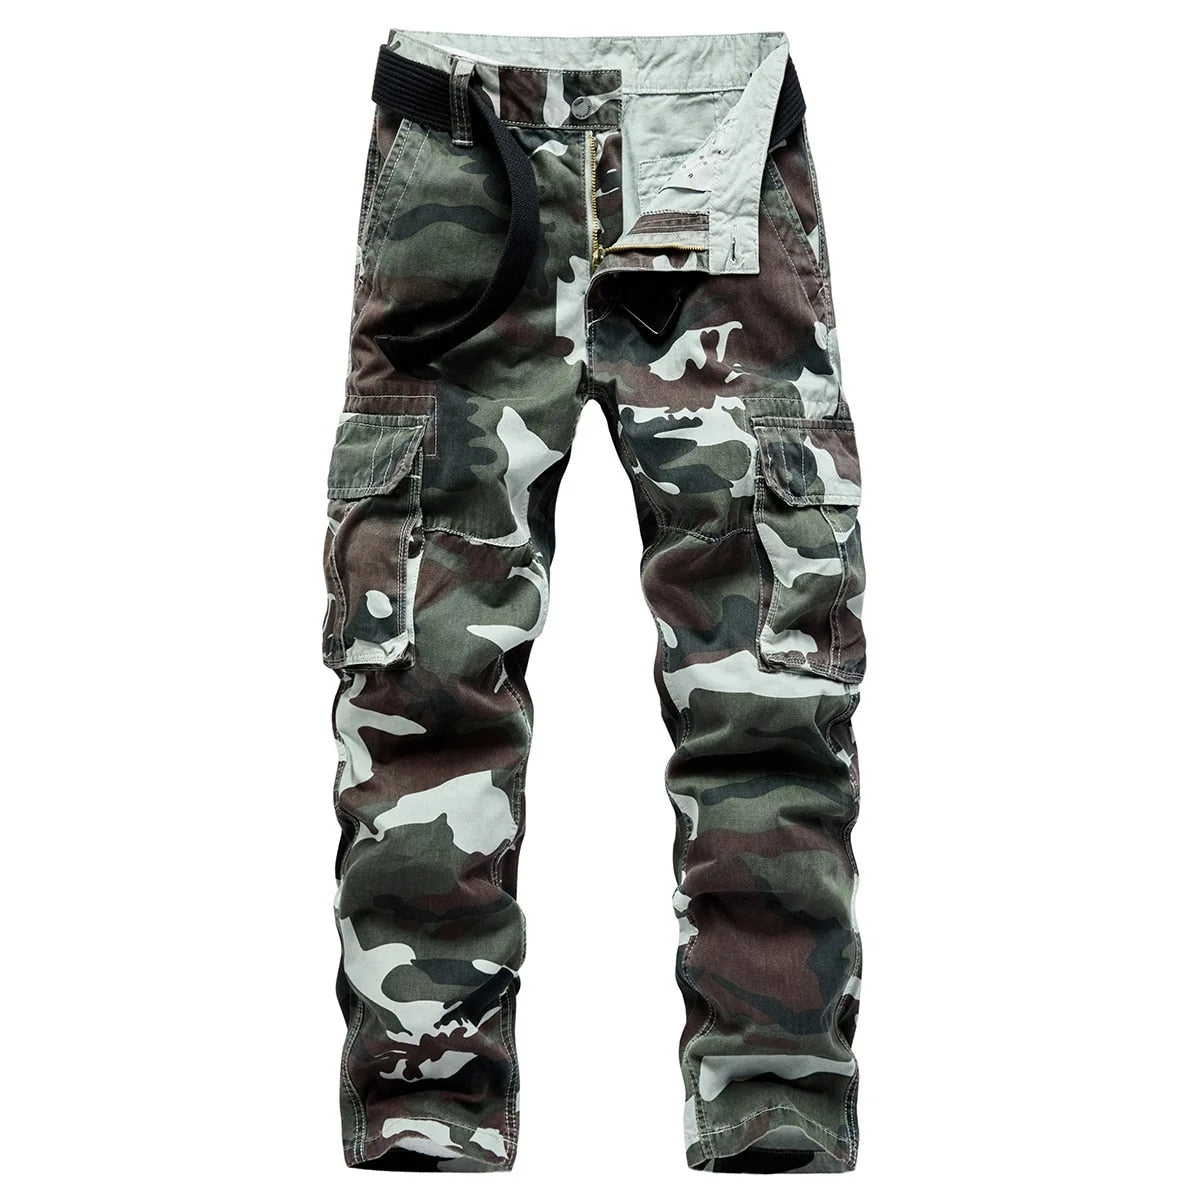 HIP HOP Streetwear Sport Spring Autumn Rock Camouflage Men'S Pocket Military Pants Fashions Casual Trouser 3716 1